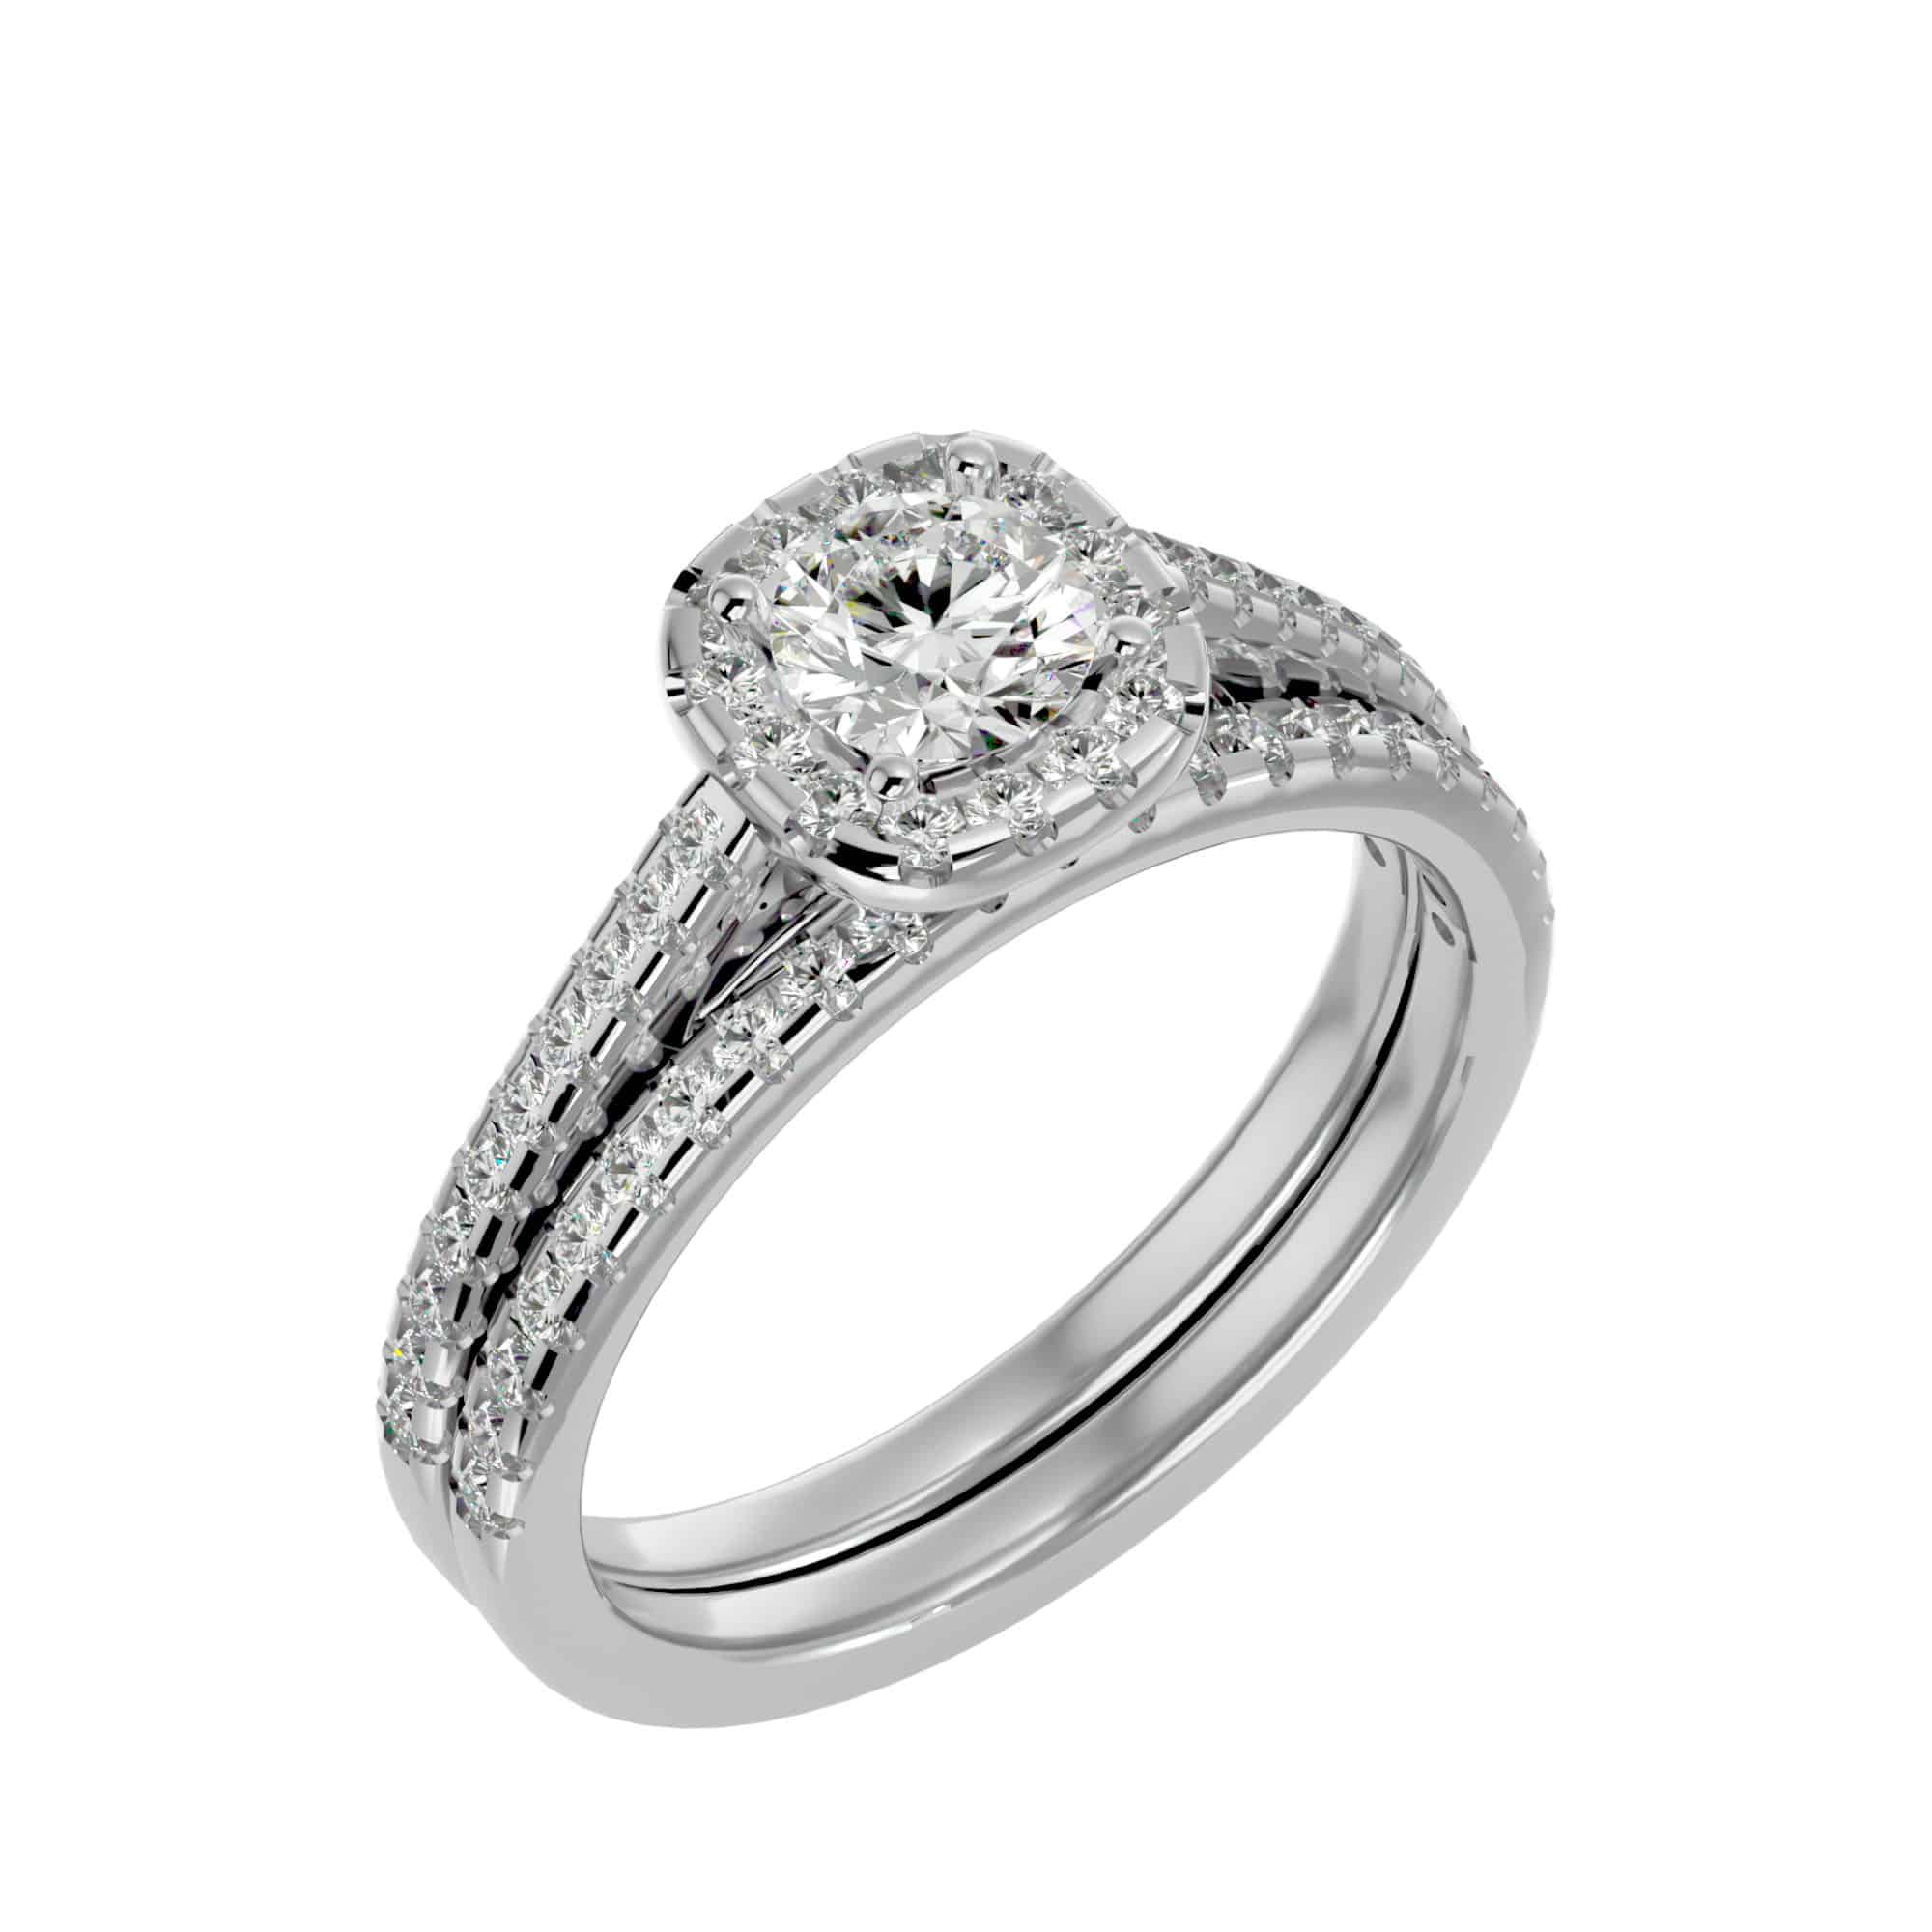 Square Halo Ring With Matching Wedding Band